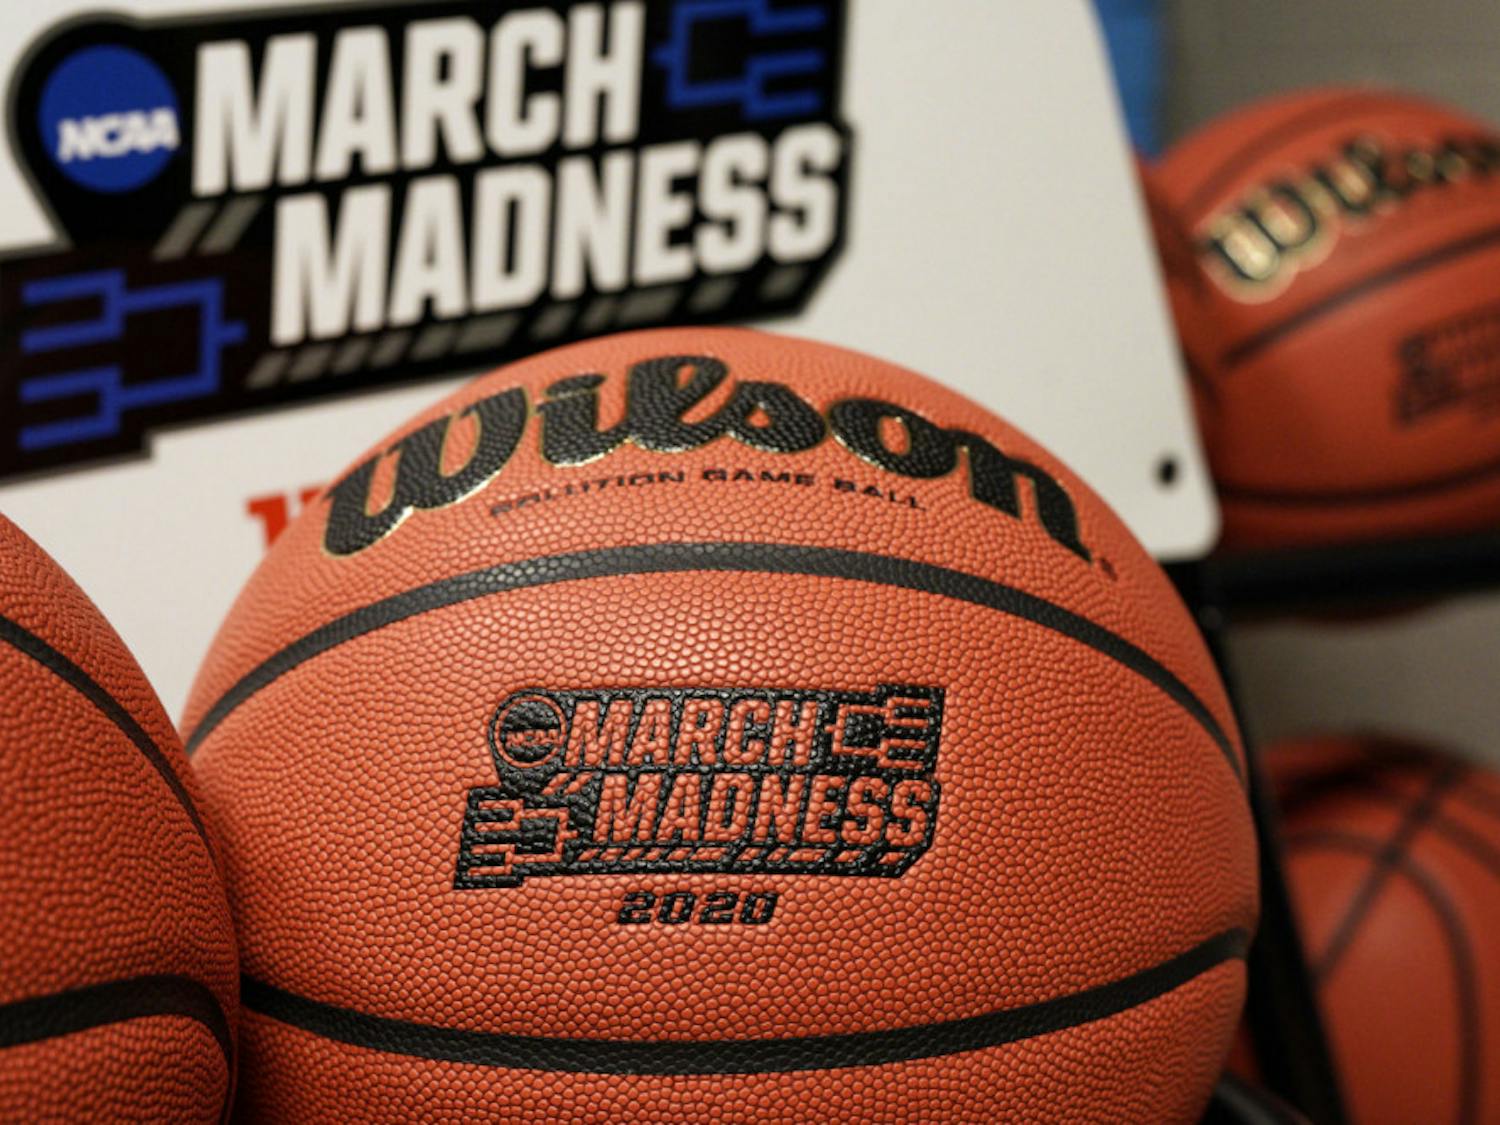 Official March Madness 2020 tournament basketballs are seen in a store room at the CHI Health Center Arena, in Omaha, Neb., Monday, March 16, 2020. Omaha was to host a first and second round in the NCAA college basketball Division I tournament, which was cancelled due to the coronavirus pandemic.